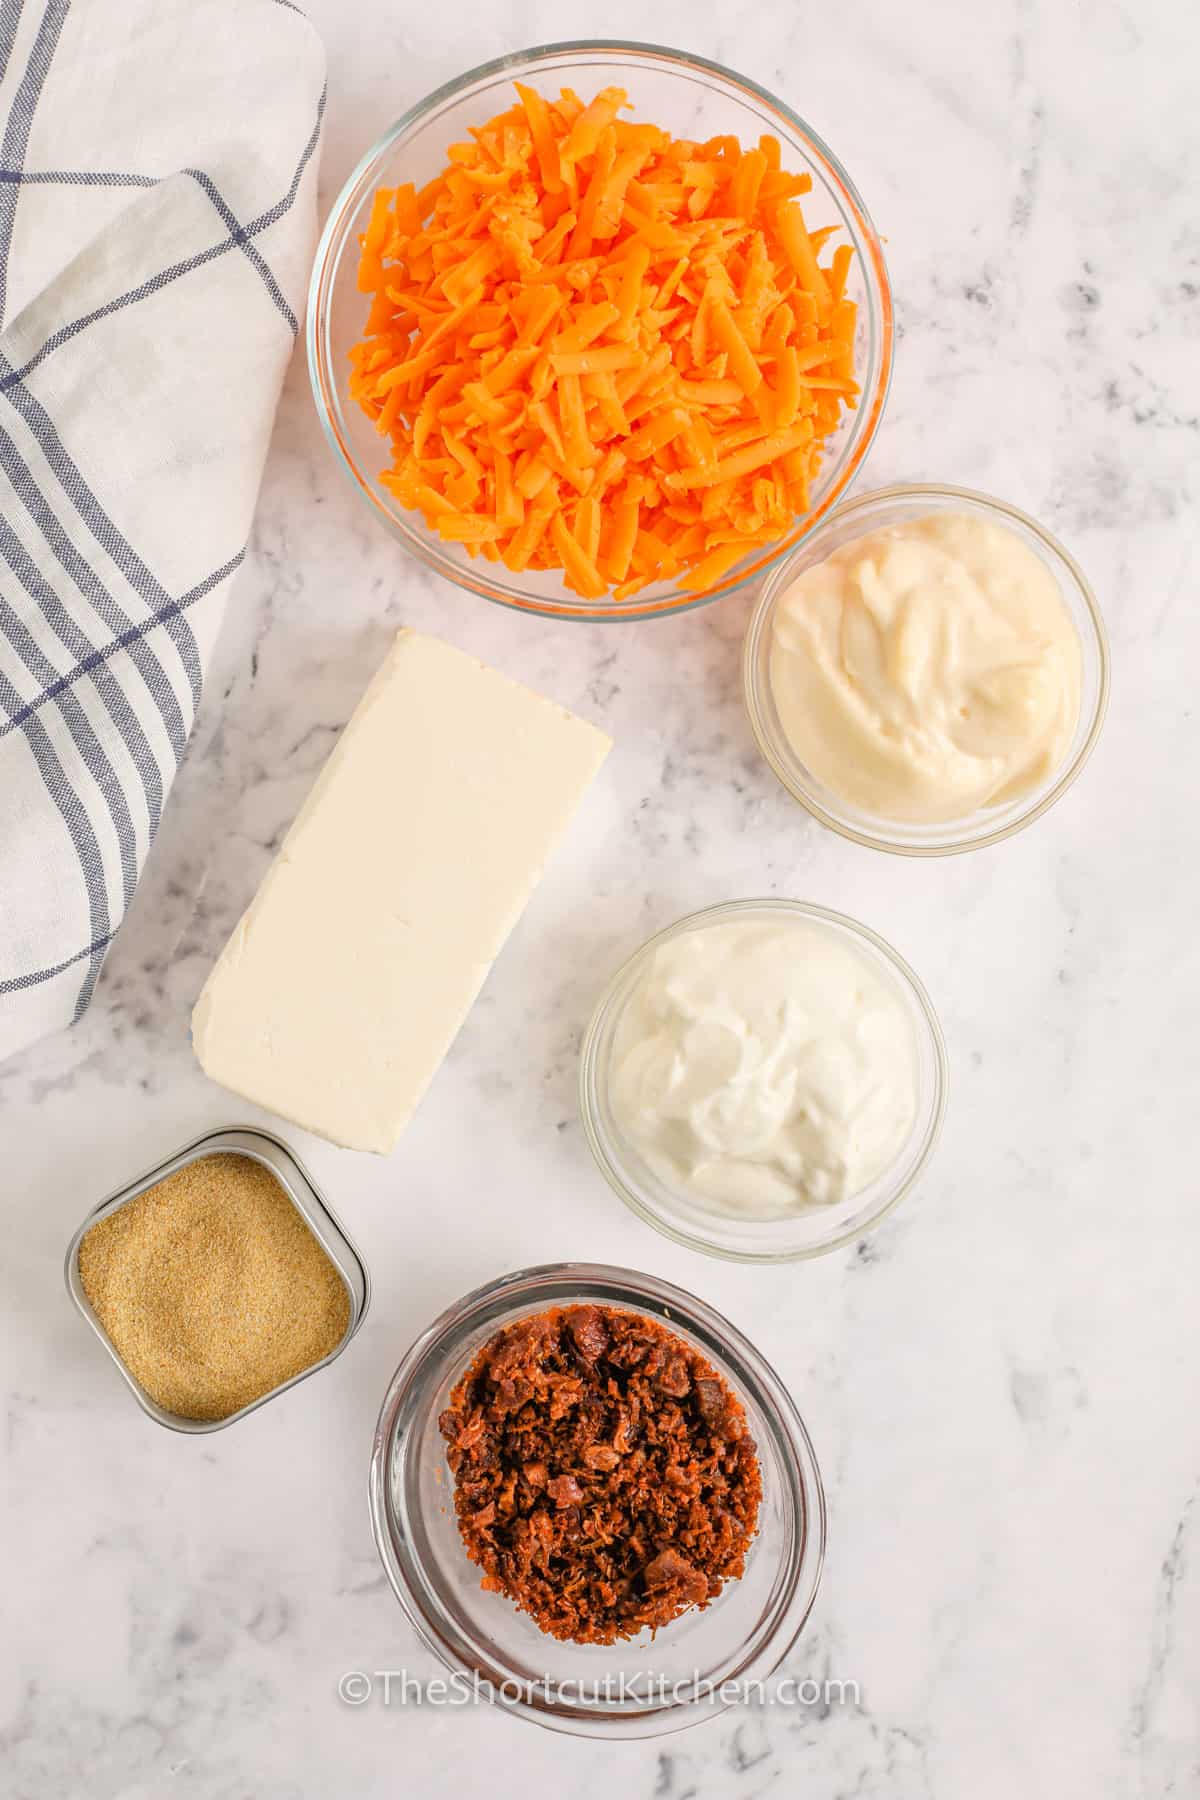 Bacon Cheddar Cream Cheese Dip Ingredients